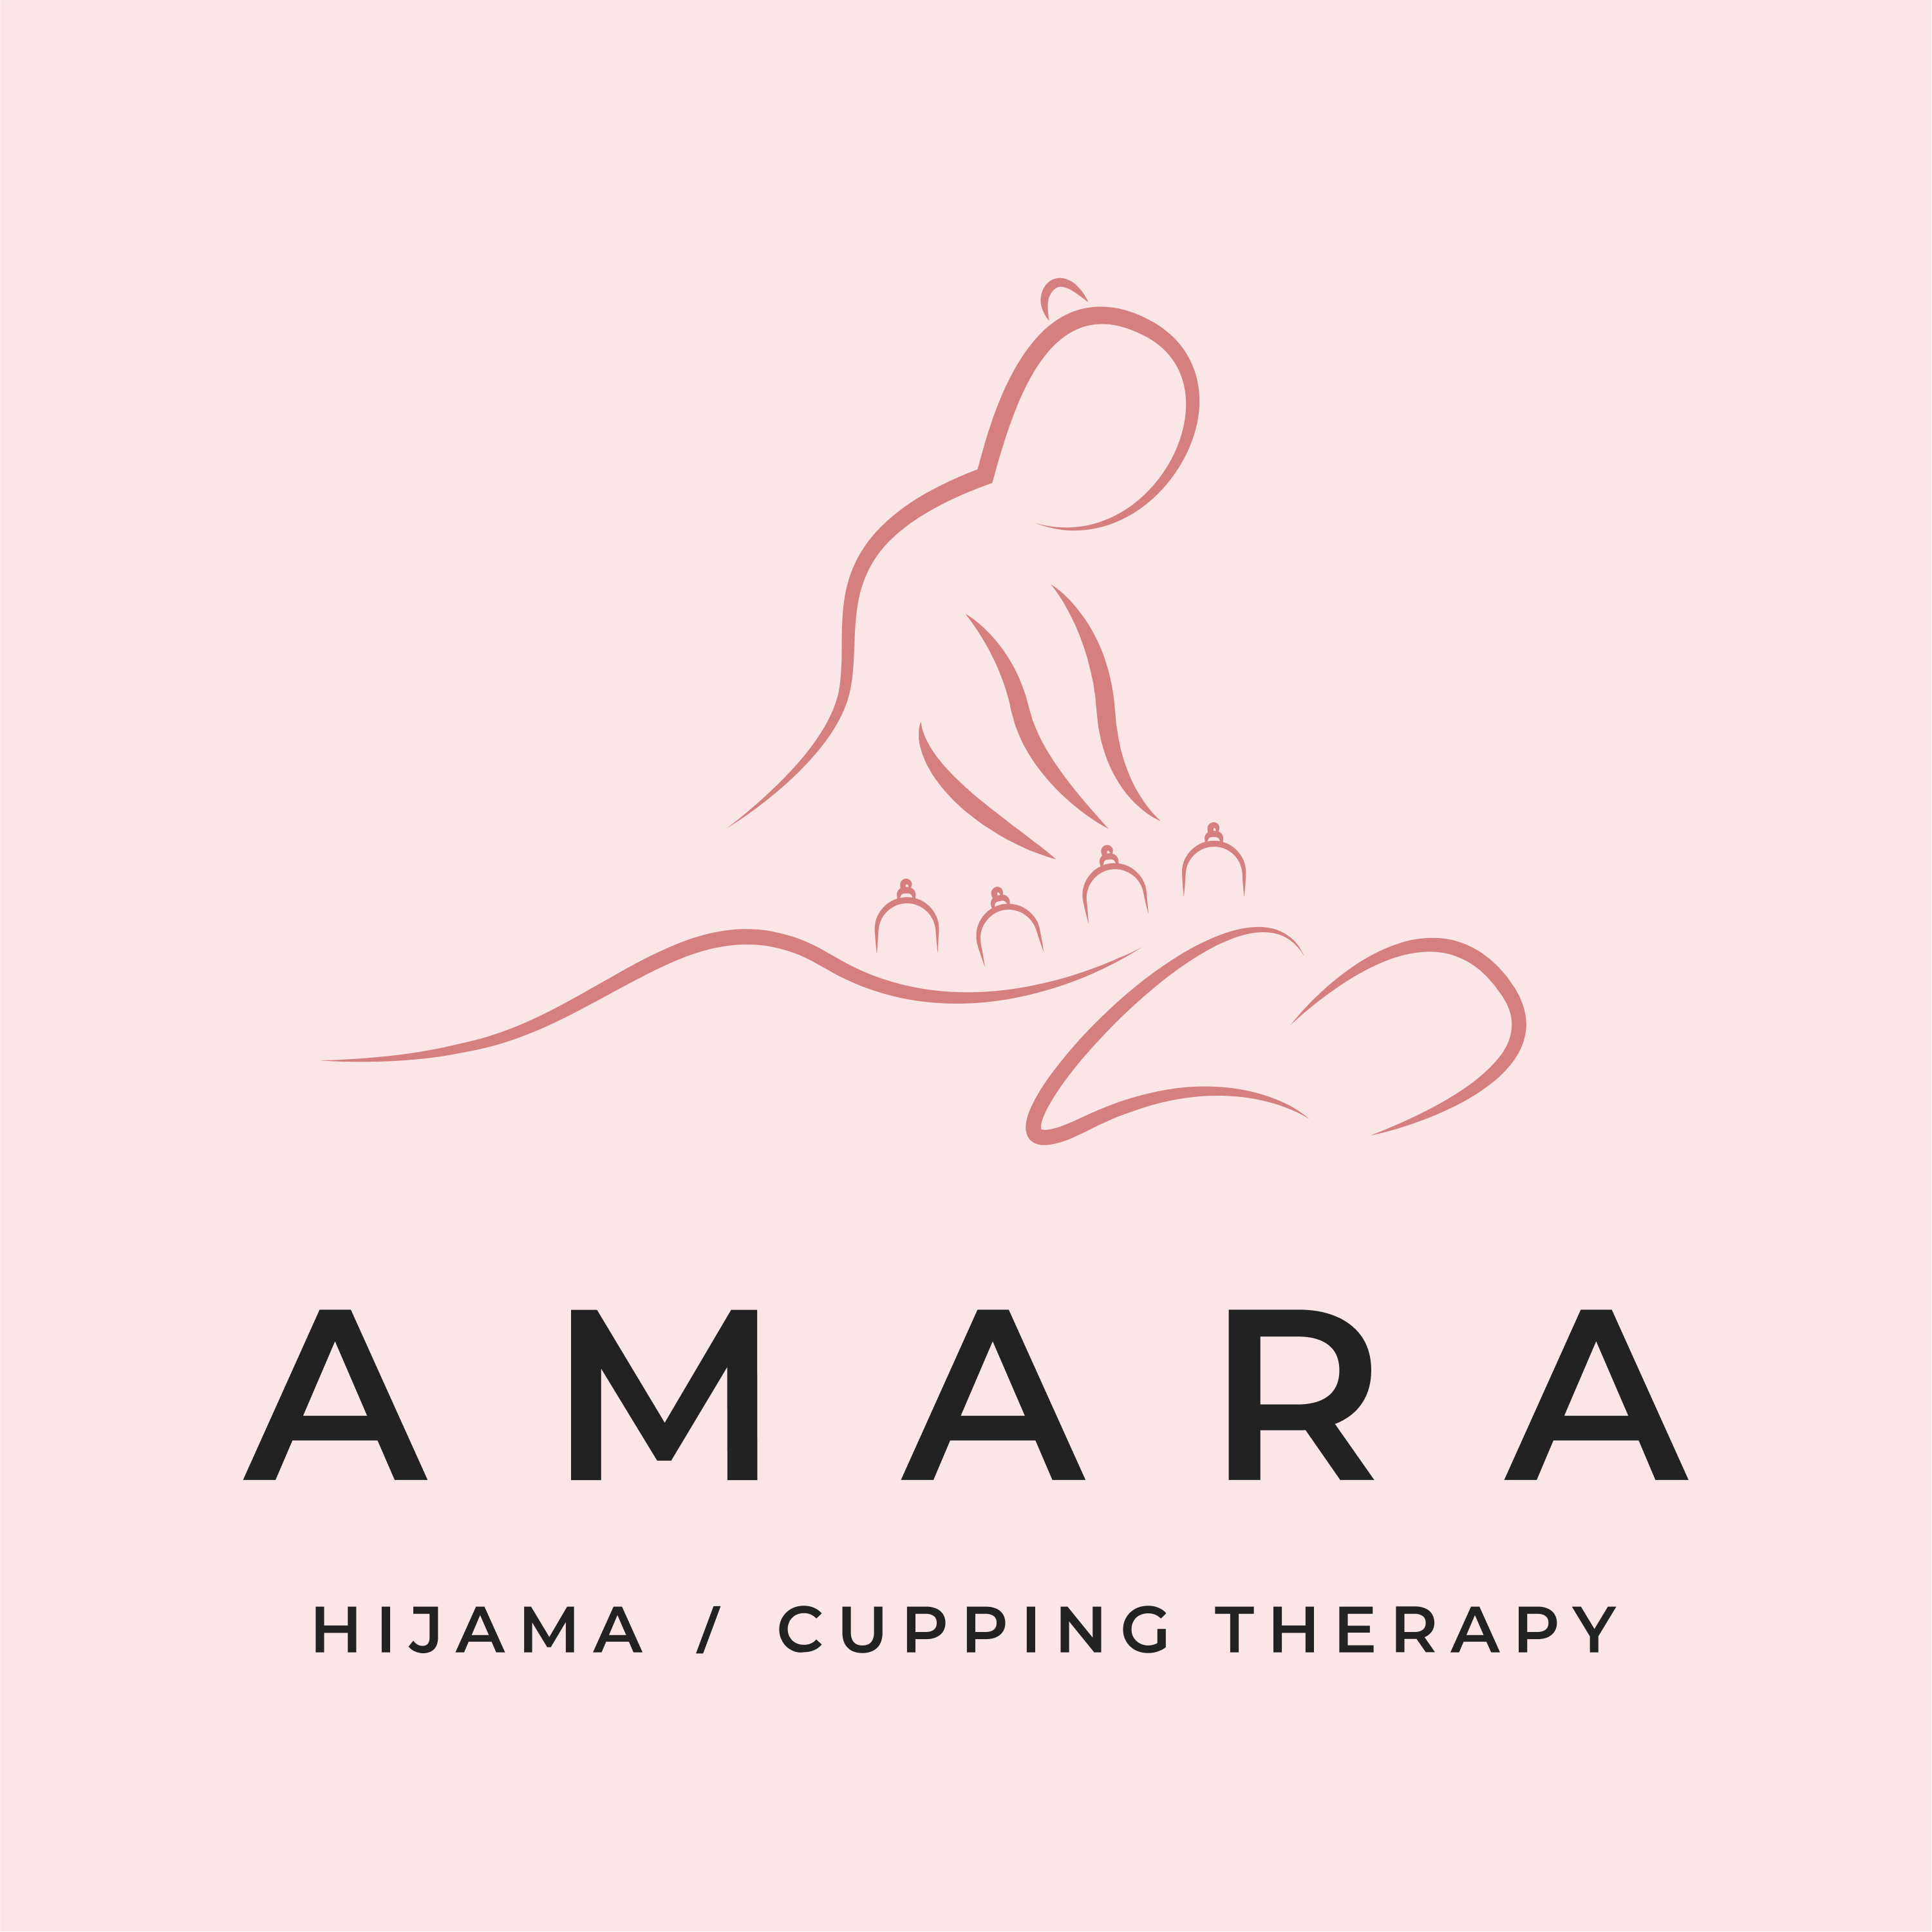 Amara Hijama / Cupping Therapy Mangalore|Dentists|Medical Services